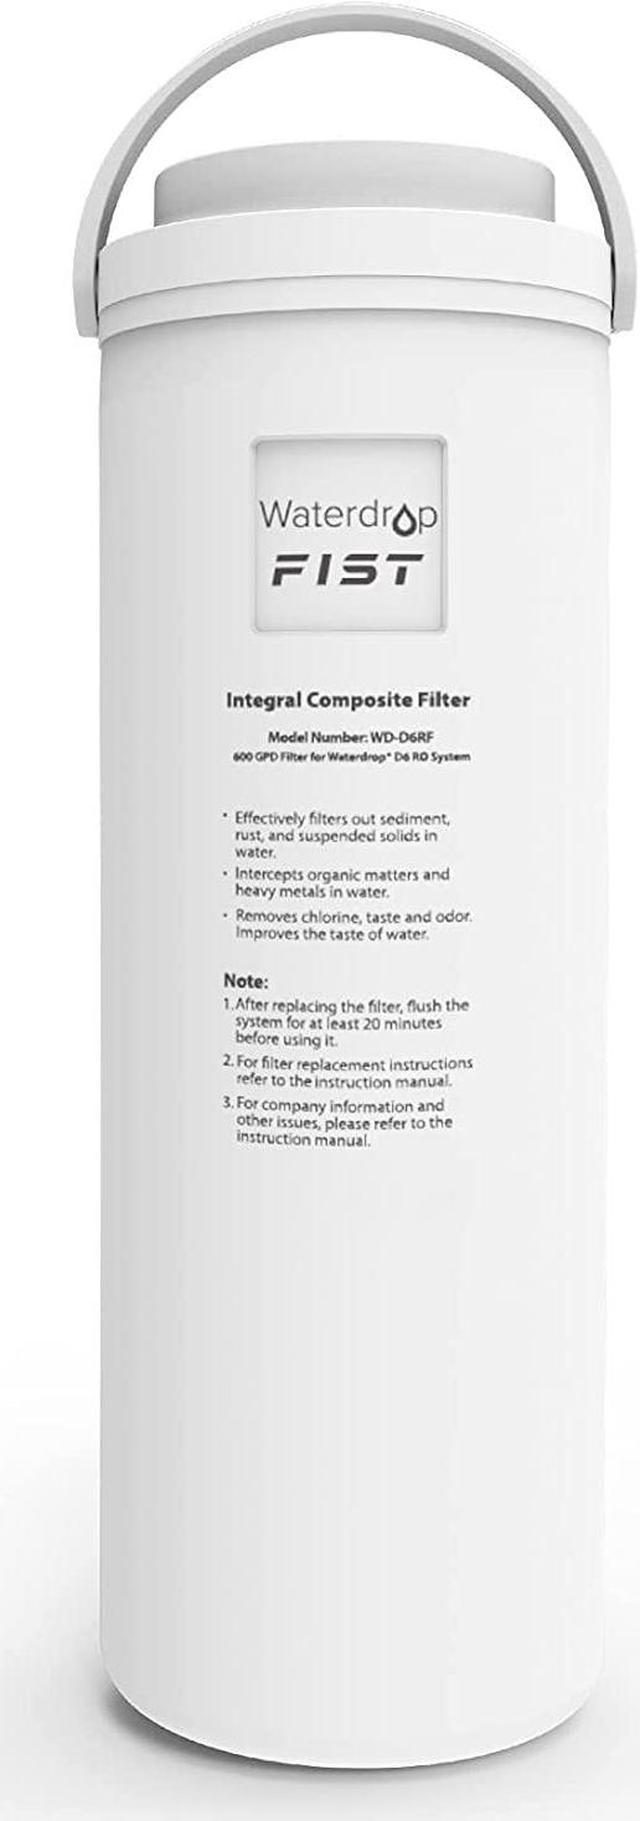 Waterdrop WD-D6RF Filter, Replacement for WD-D6-B Reverse Osmosis System 